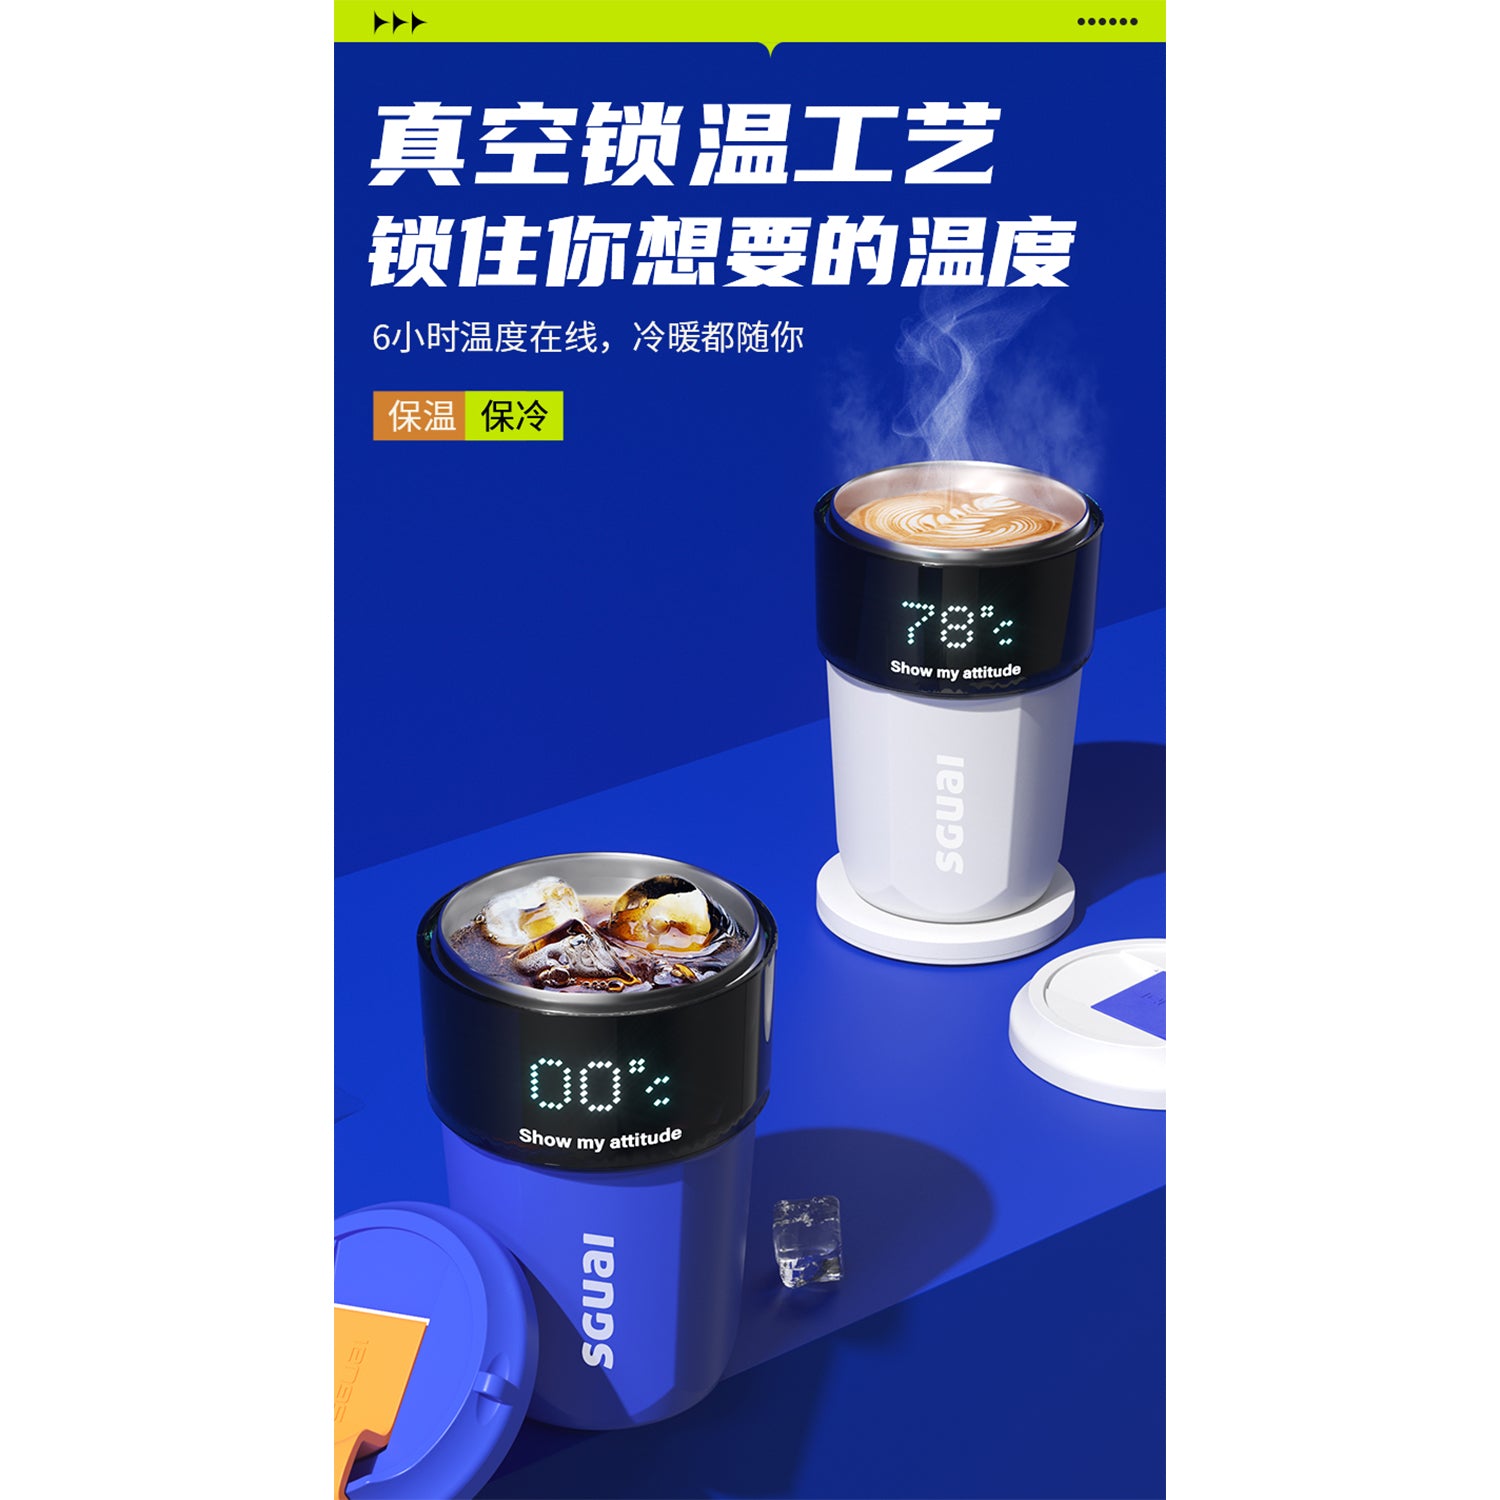 O2W SELECTION SGUAI C3 Smart Pixel Coffee Cup 350ml Thermos Insulated Travel Mug DIY Personalized Text/Animation Pixel Expression Screen | Temperature Display | Water Drinking Reminder | IPX6 Waterproof